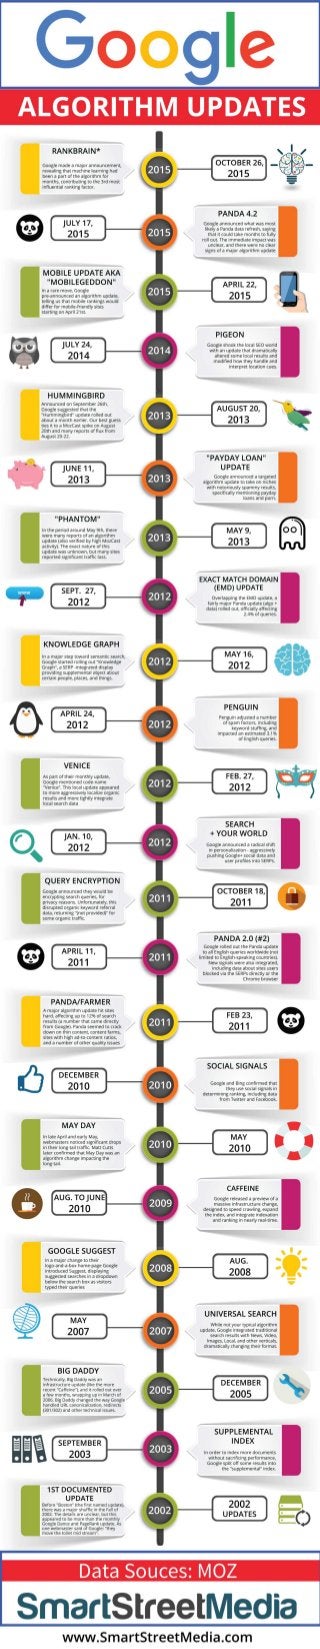 Google algorithm update history from 2002 2015 [infographic]